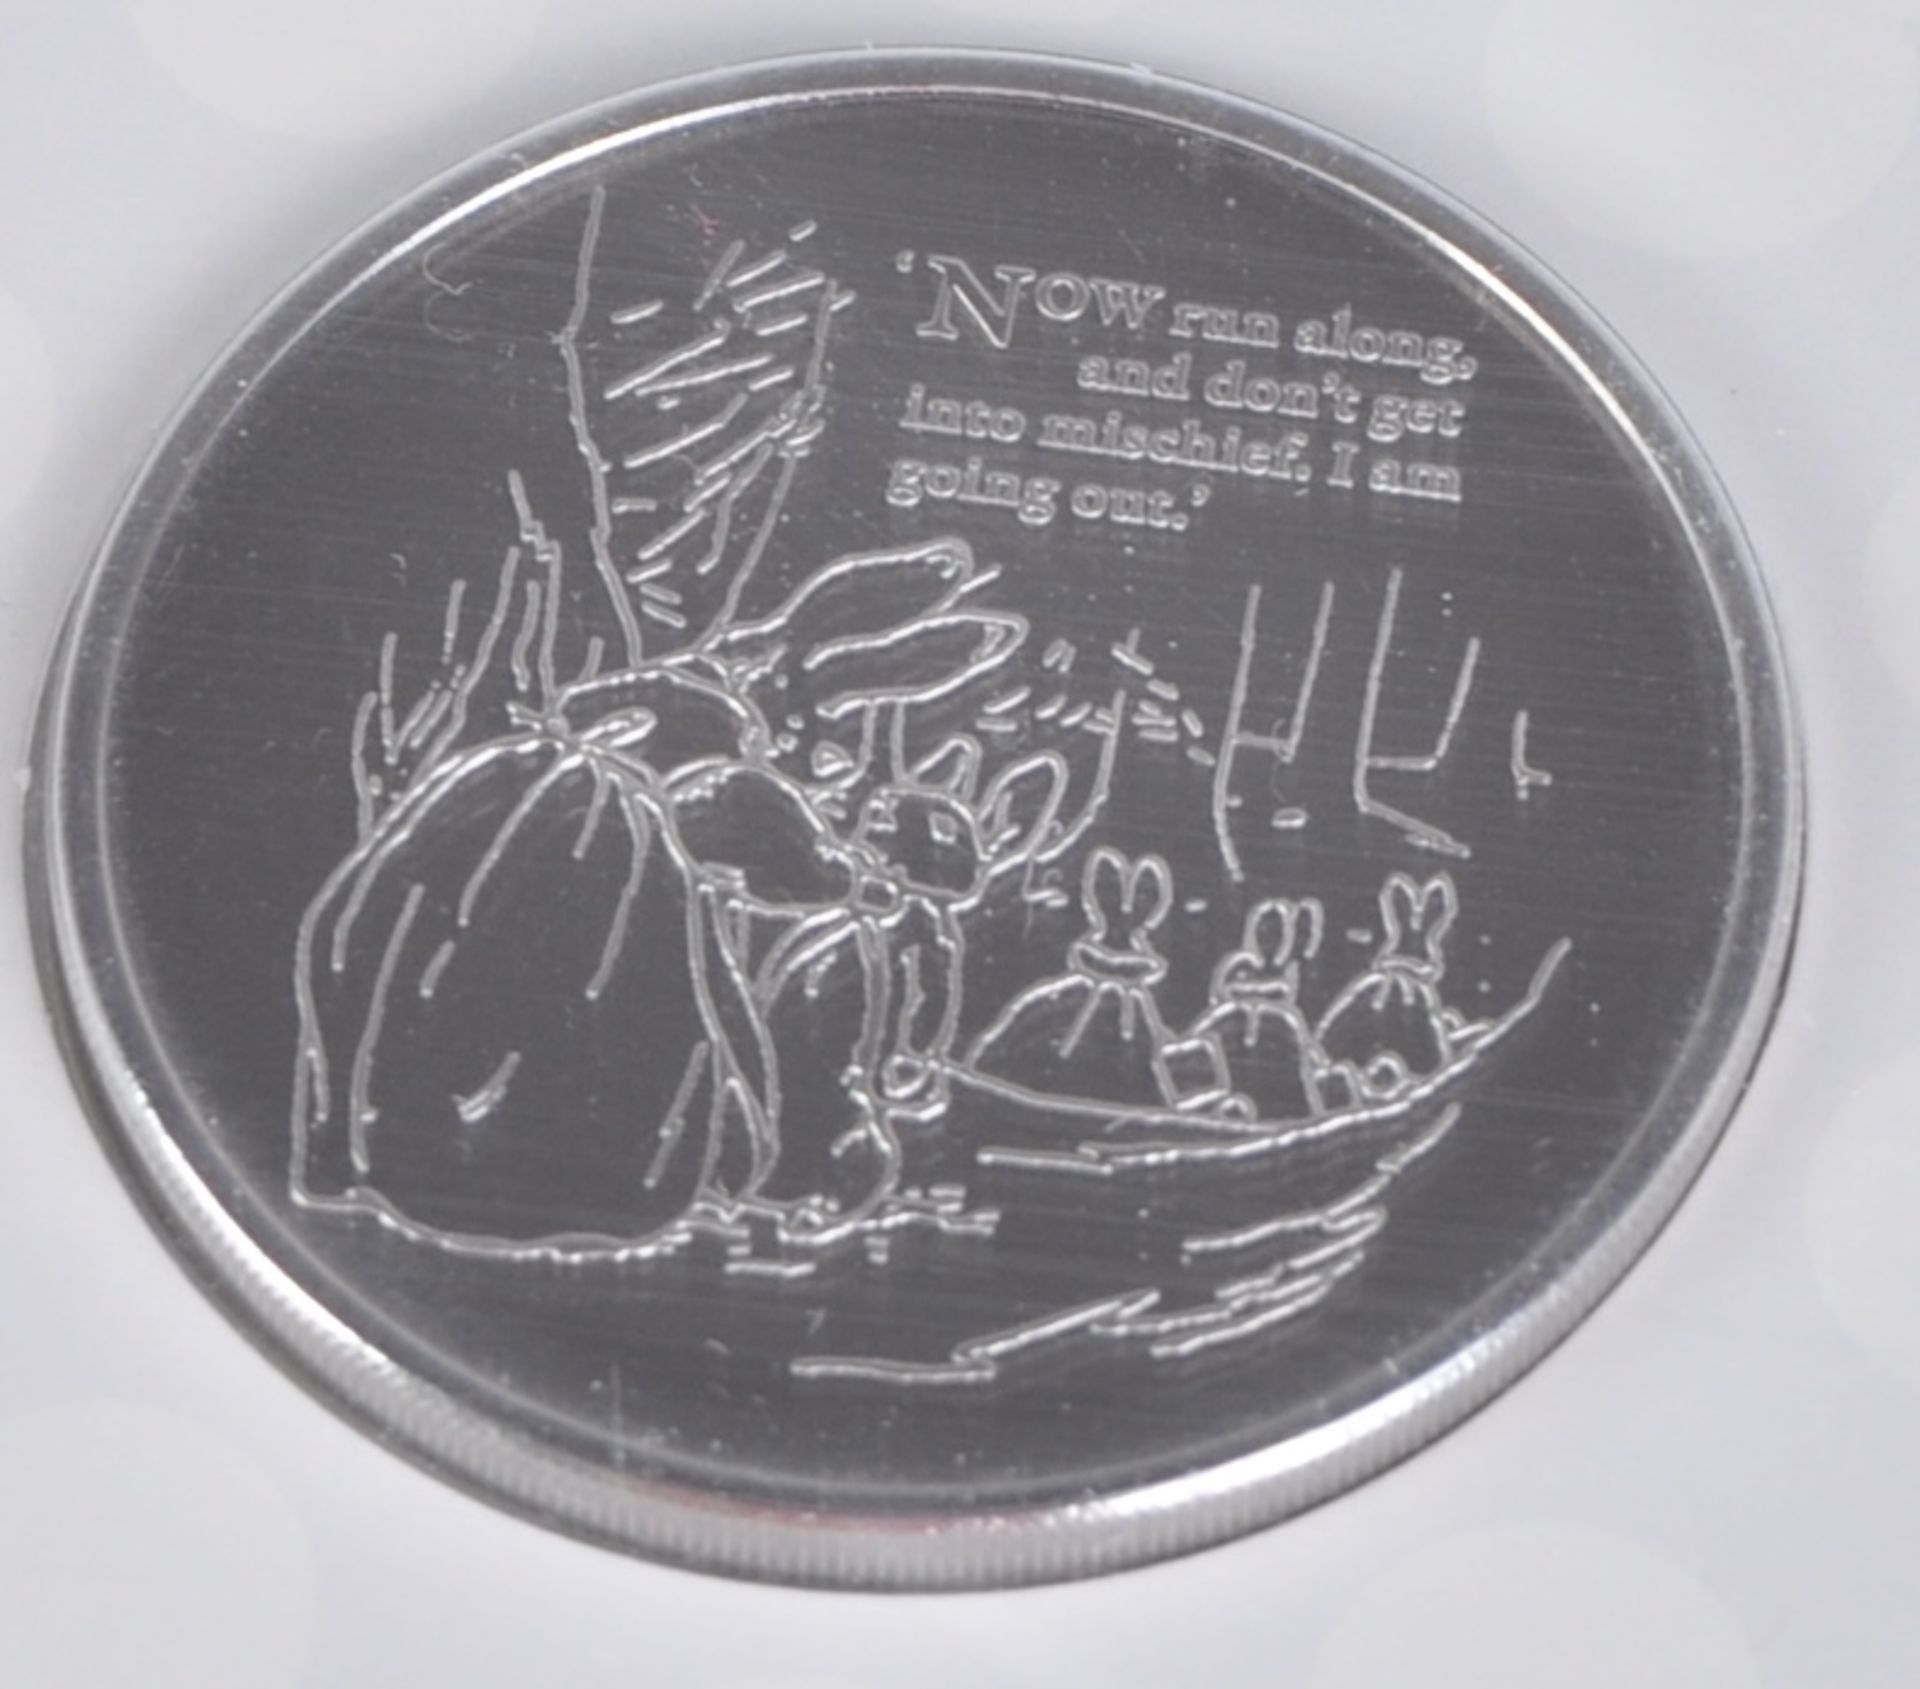 COINS - ROYAL MINT - £5 BRILLIANT UNCIRCULATED PRESENTATION COINS - Image 6 of 7